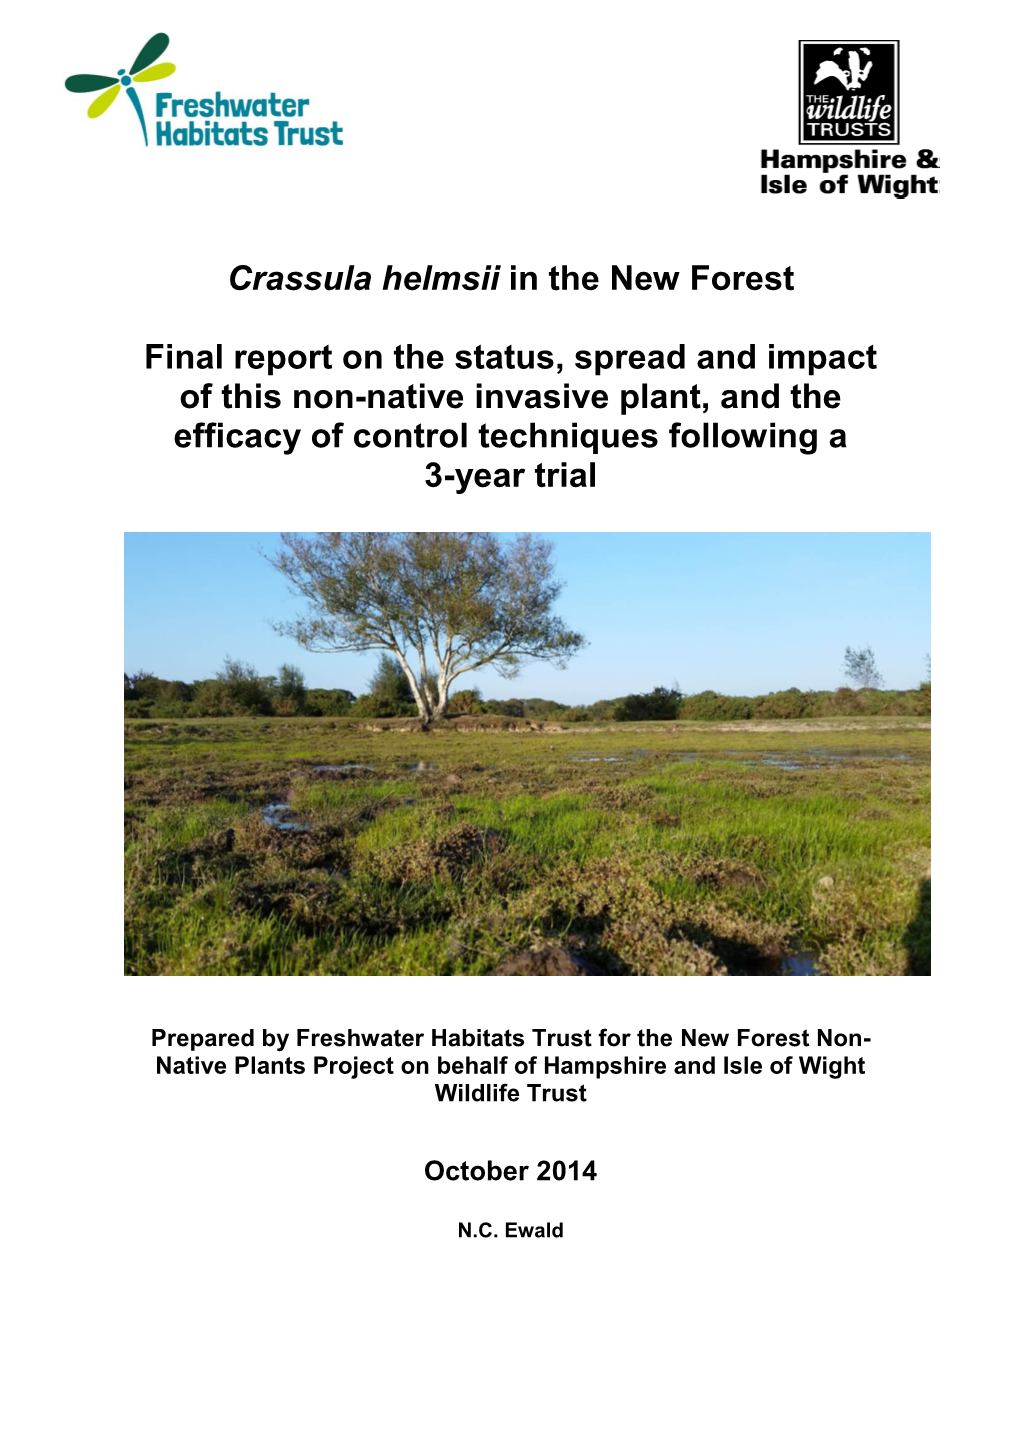 Crassula Helmsii in the New Forest Final Report on the Status, Spread and Impact of This Non-Native Invasive Plant, and The